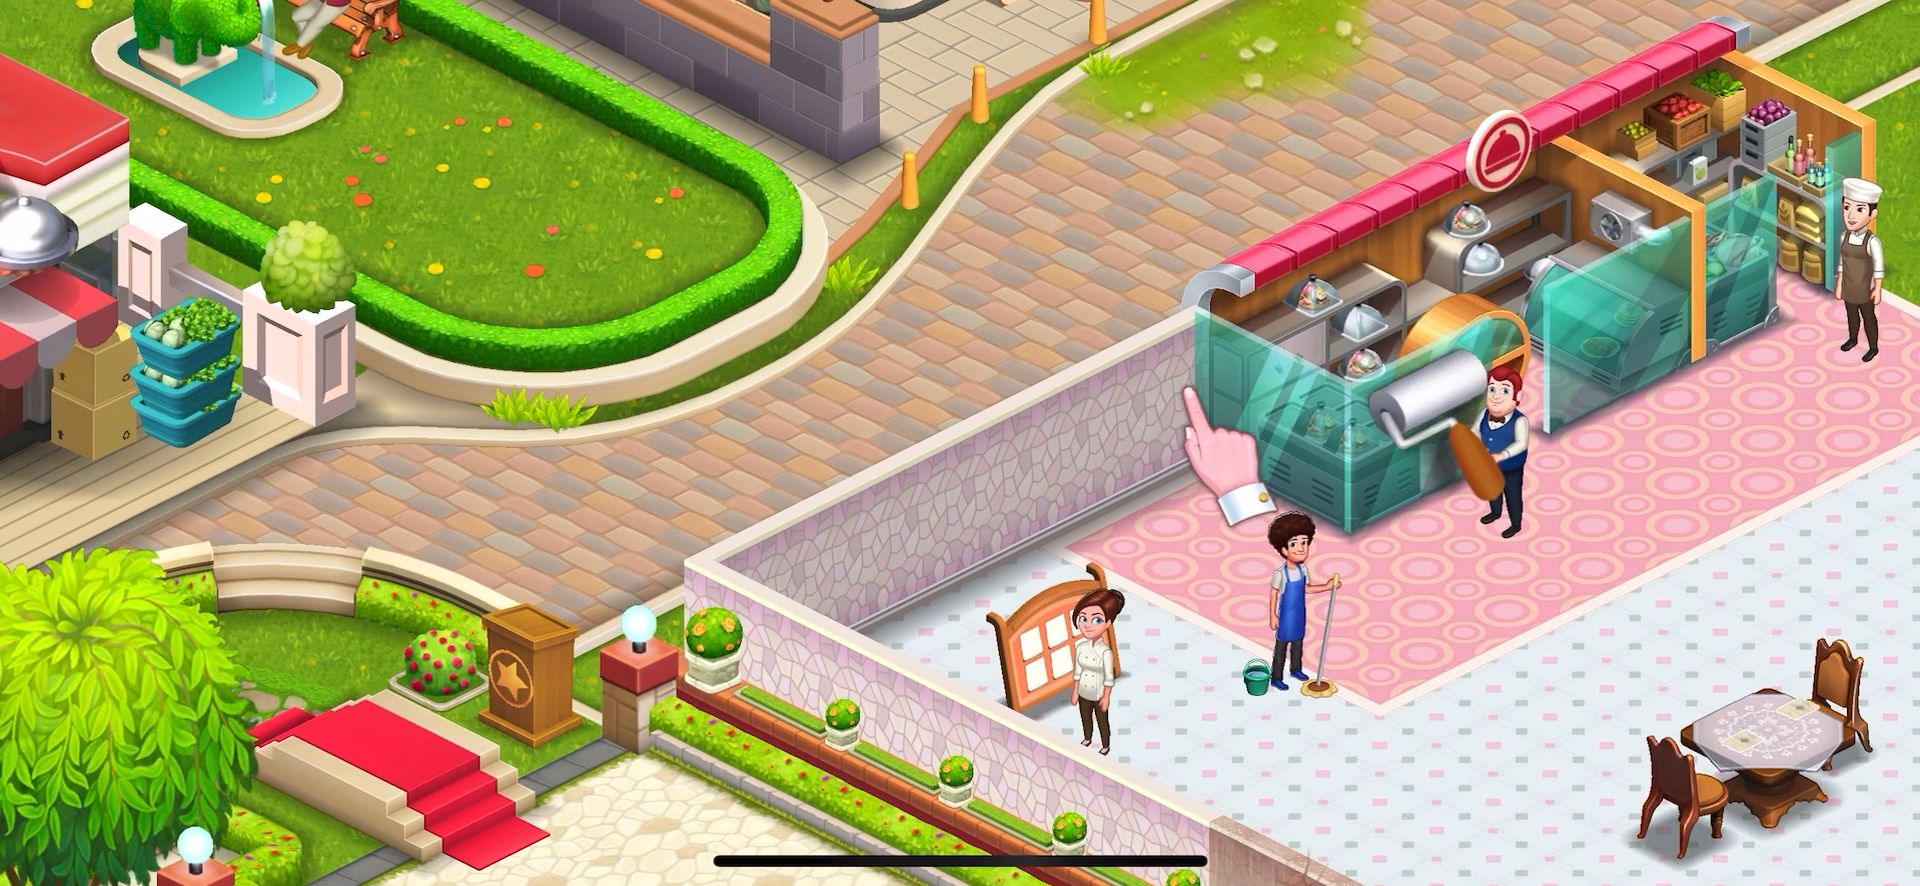 Gameplay of the Tasty Cooking Cafe & Restaurant Game: Star Chef 2 for Android phone or tablet.